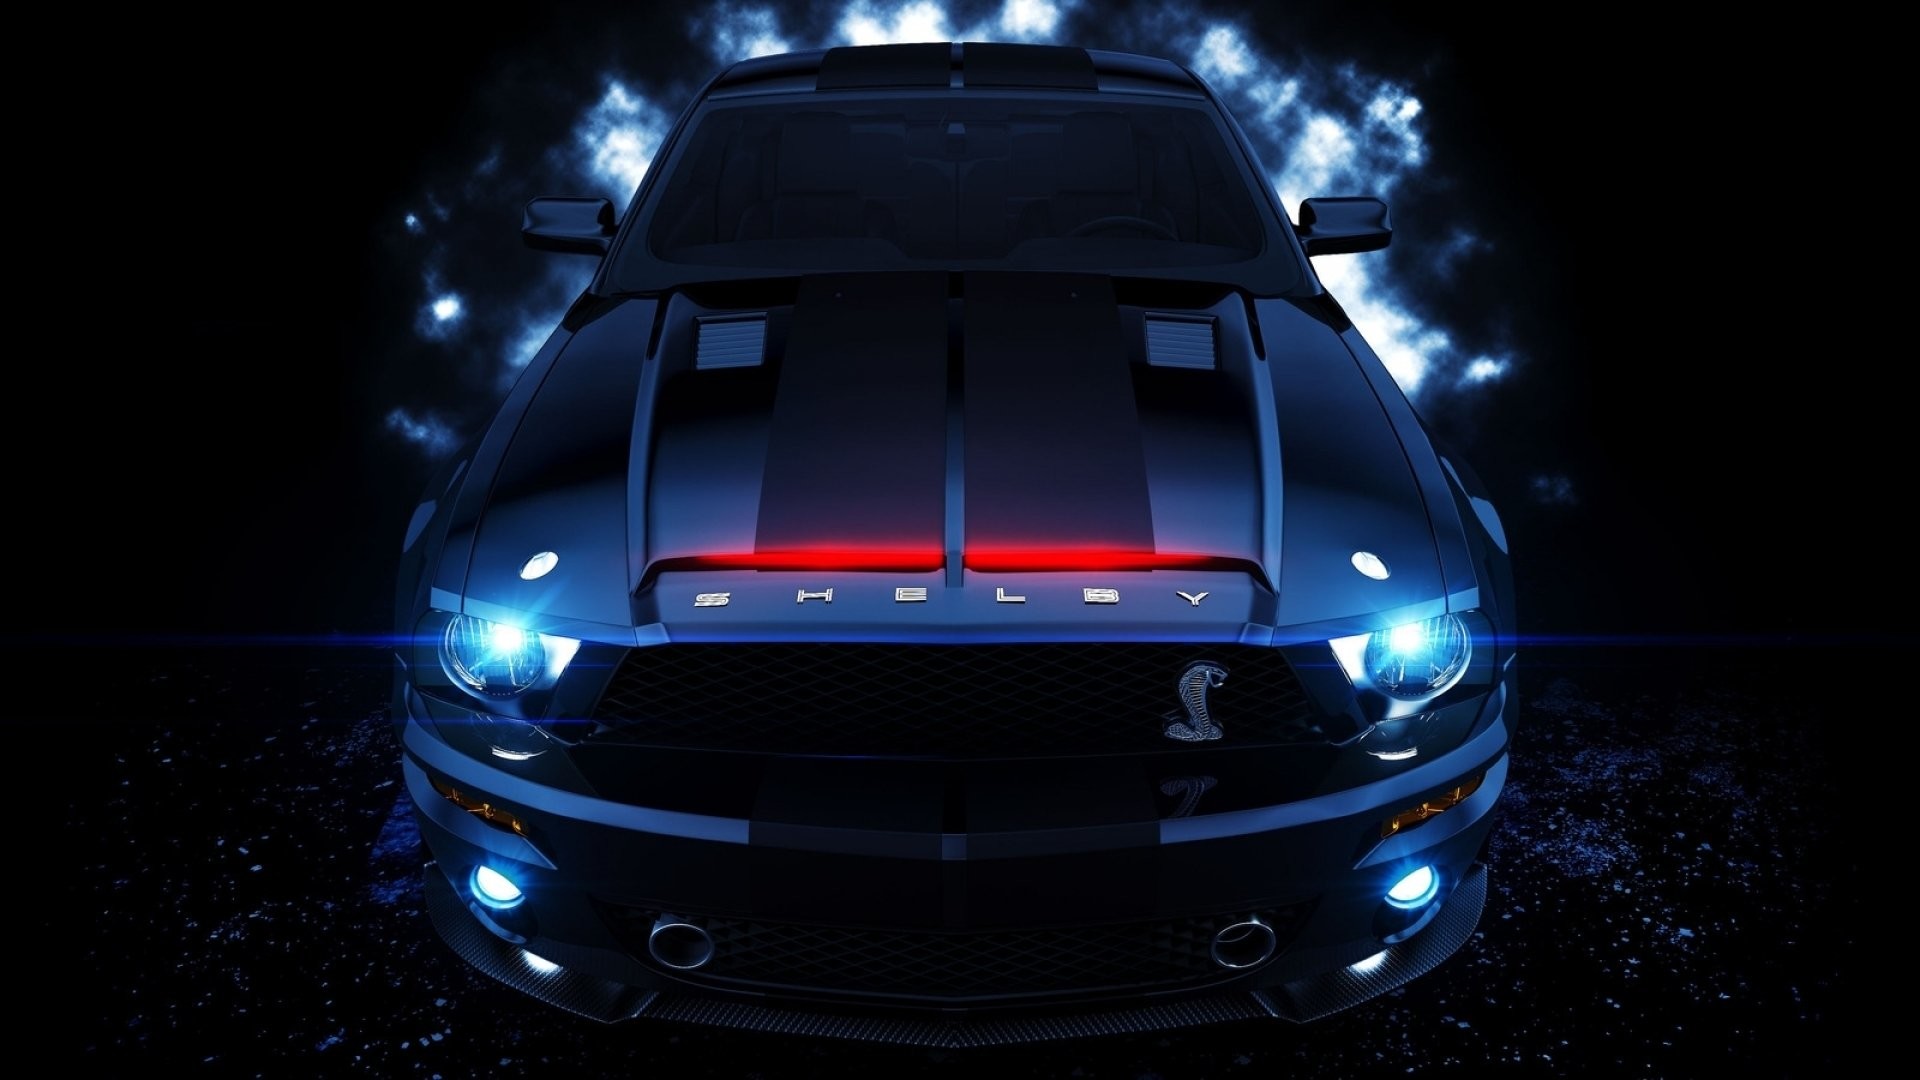 1920x1080 Vehicles - Ford Mustang Shelby GT500 Wallpaper